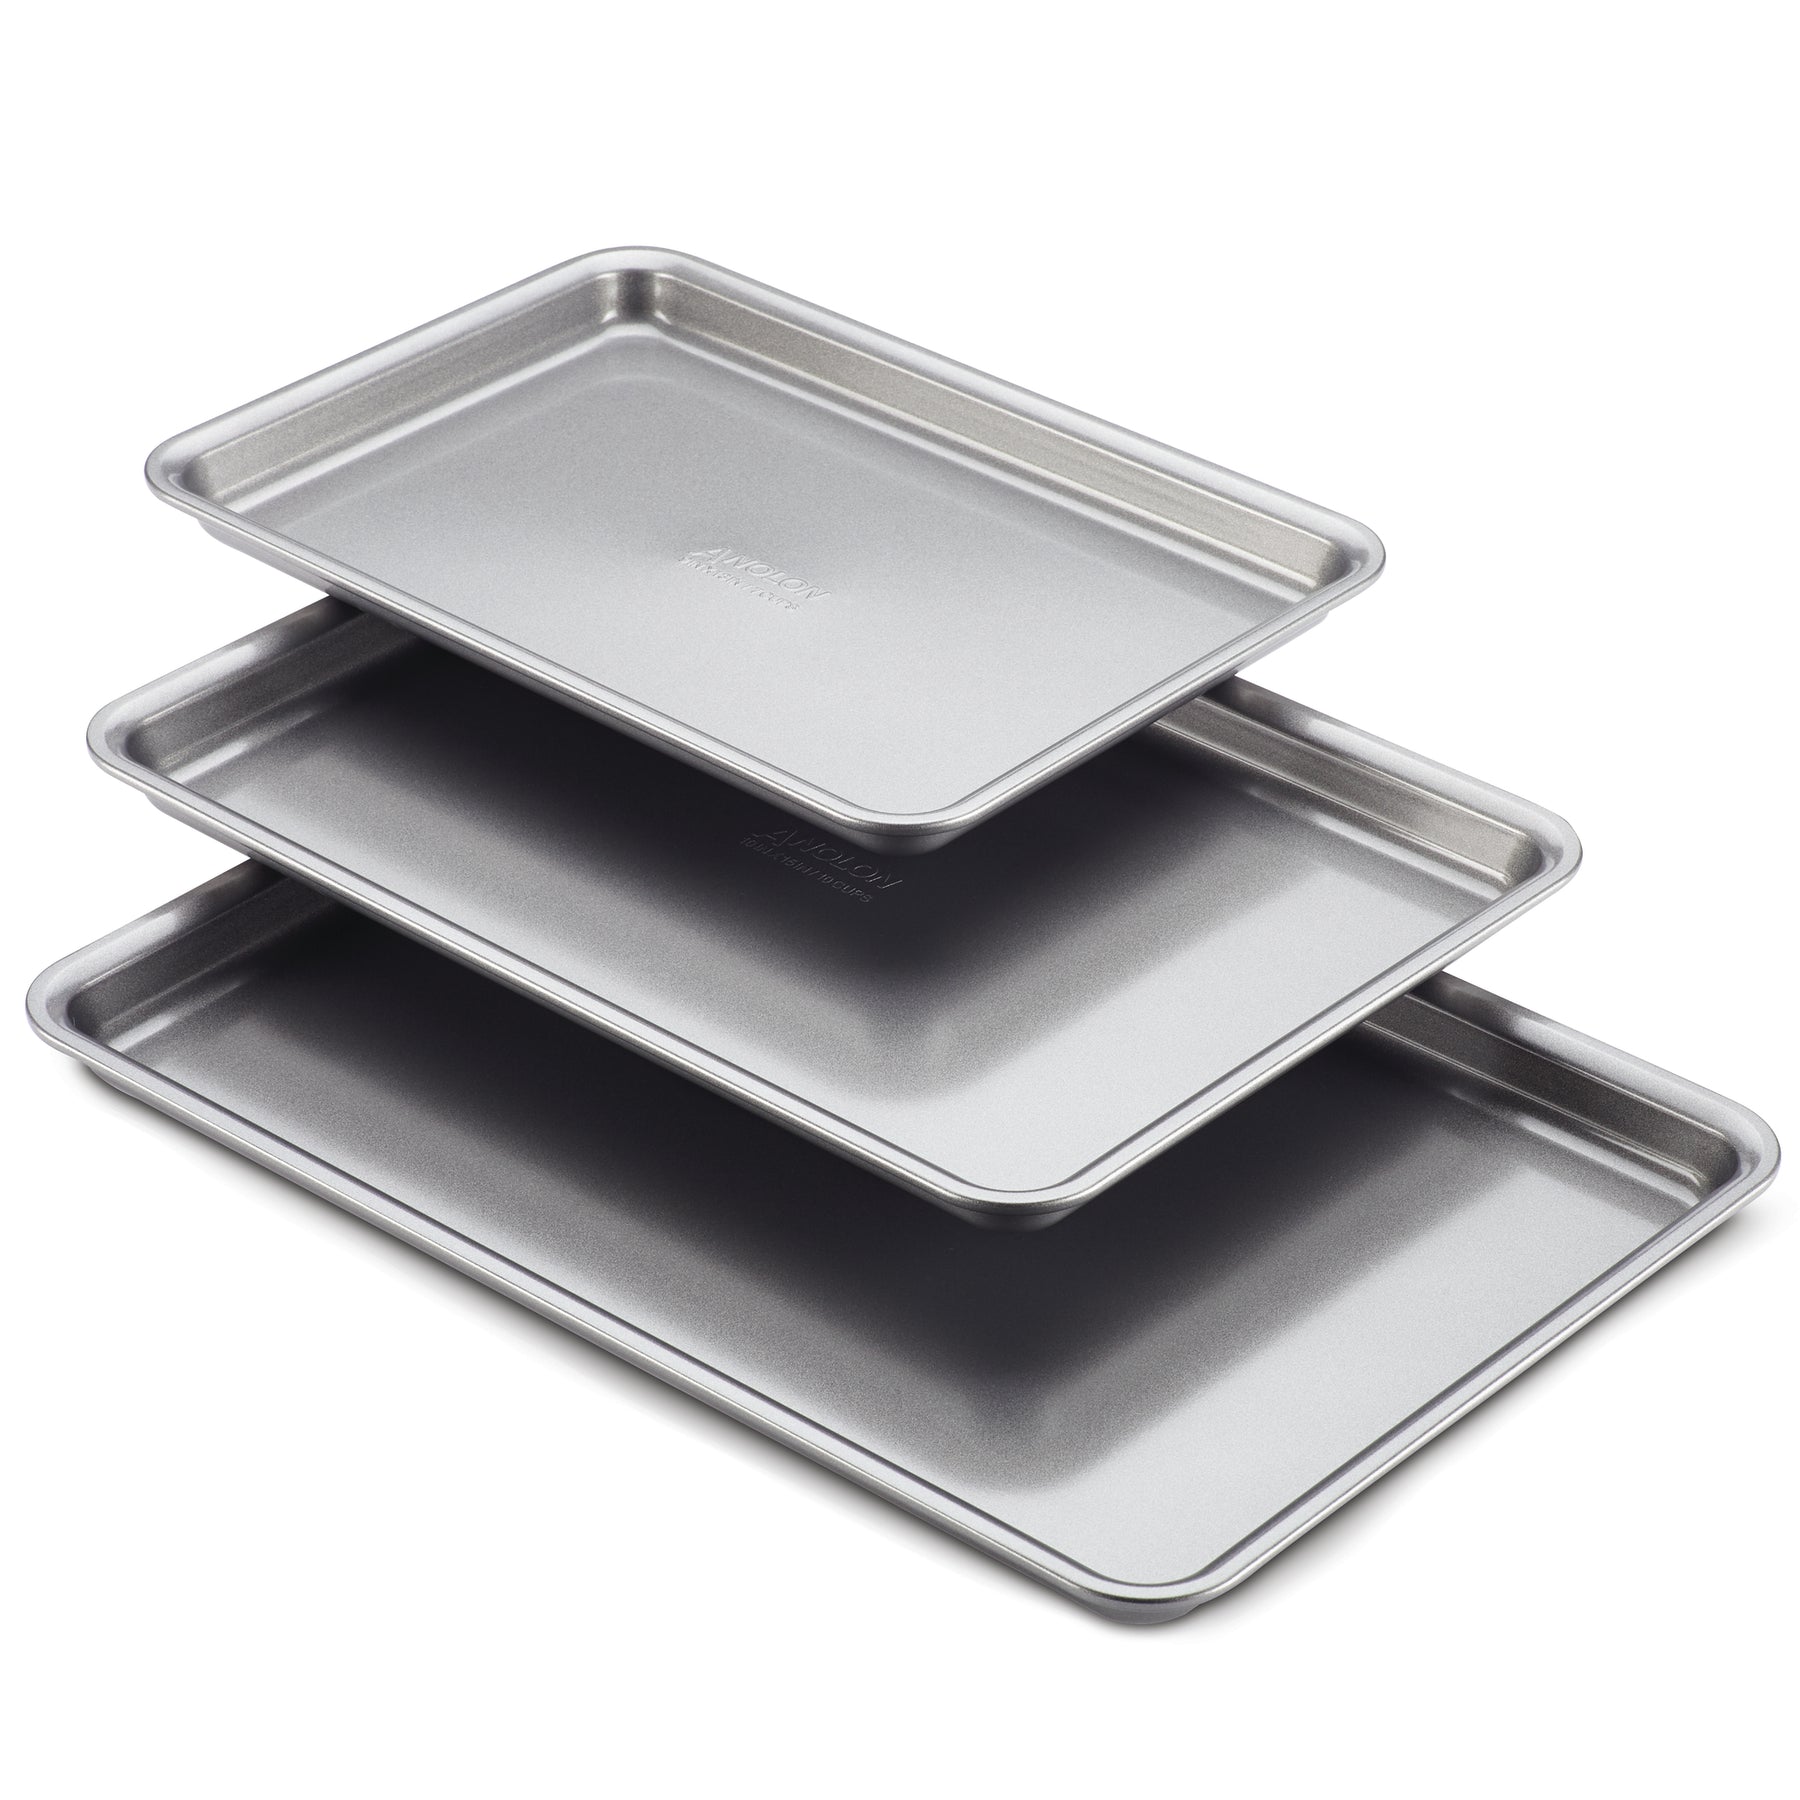 Anolon Advanced Bakeware Nonstick Cookie Sheets, Set of 2